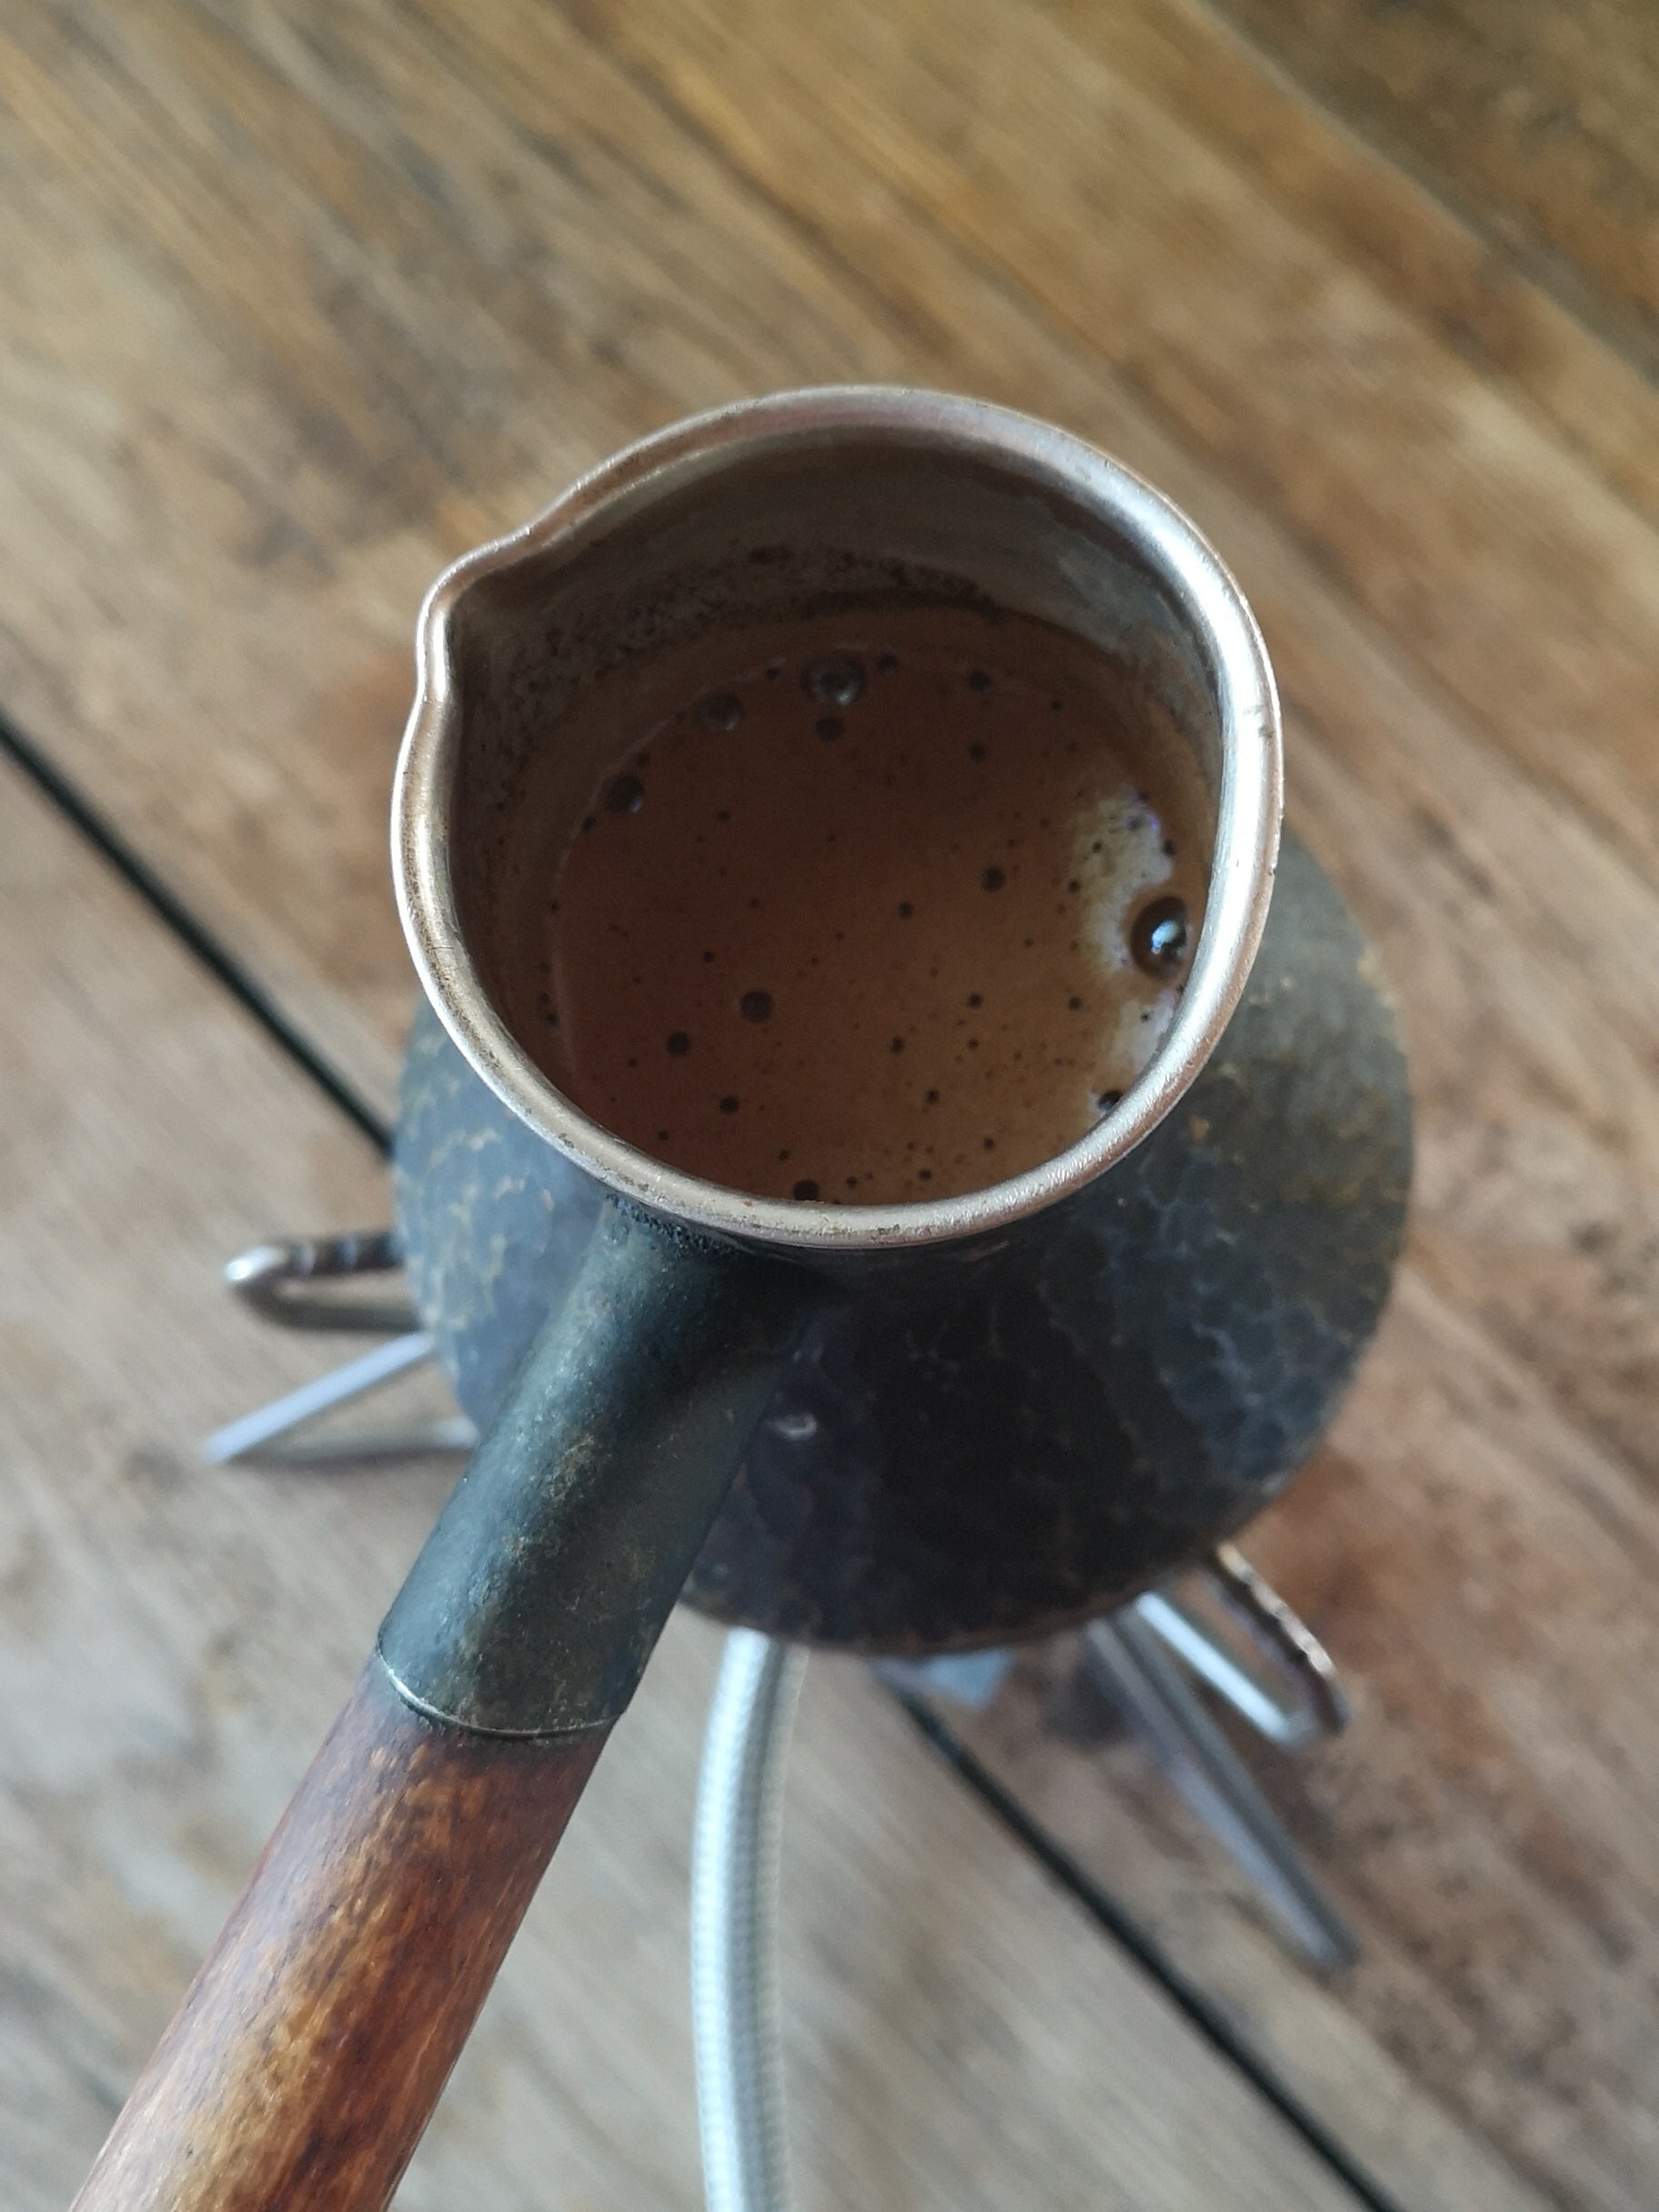 how to make real Turkish coffee sailing cruising tamed winds blog post 10 things every woman should learn before moving aboard (plus bonus Dad’s coffee recipe)